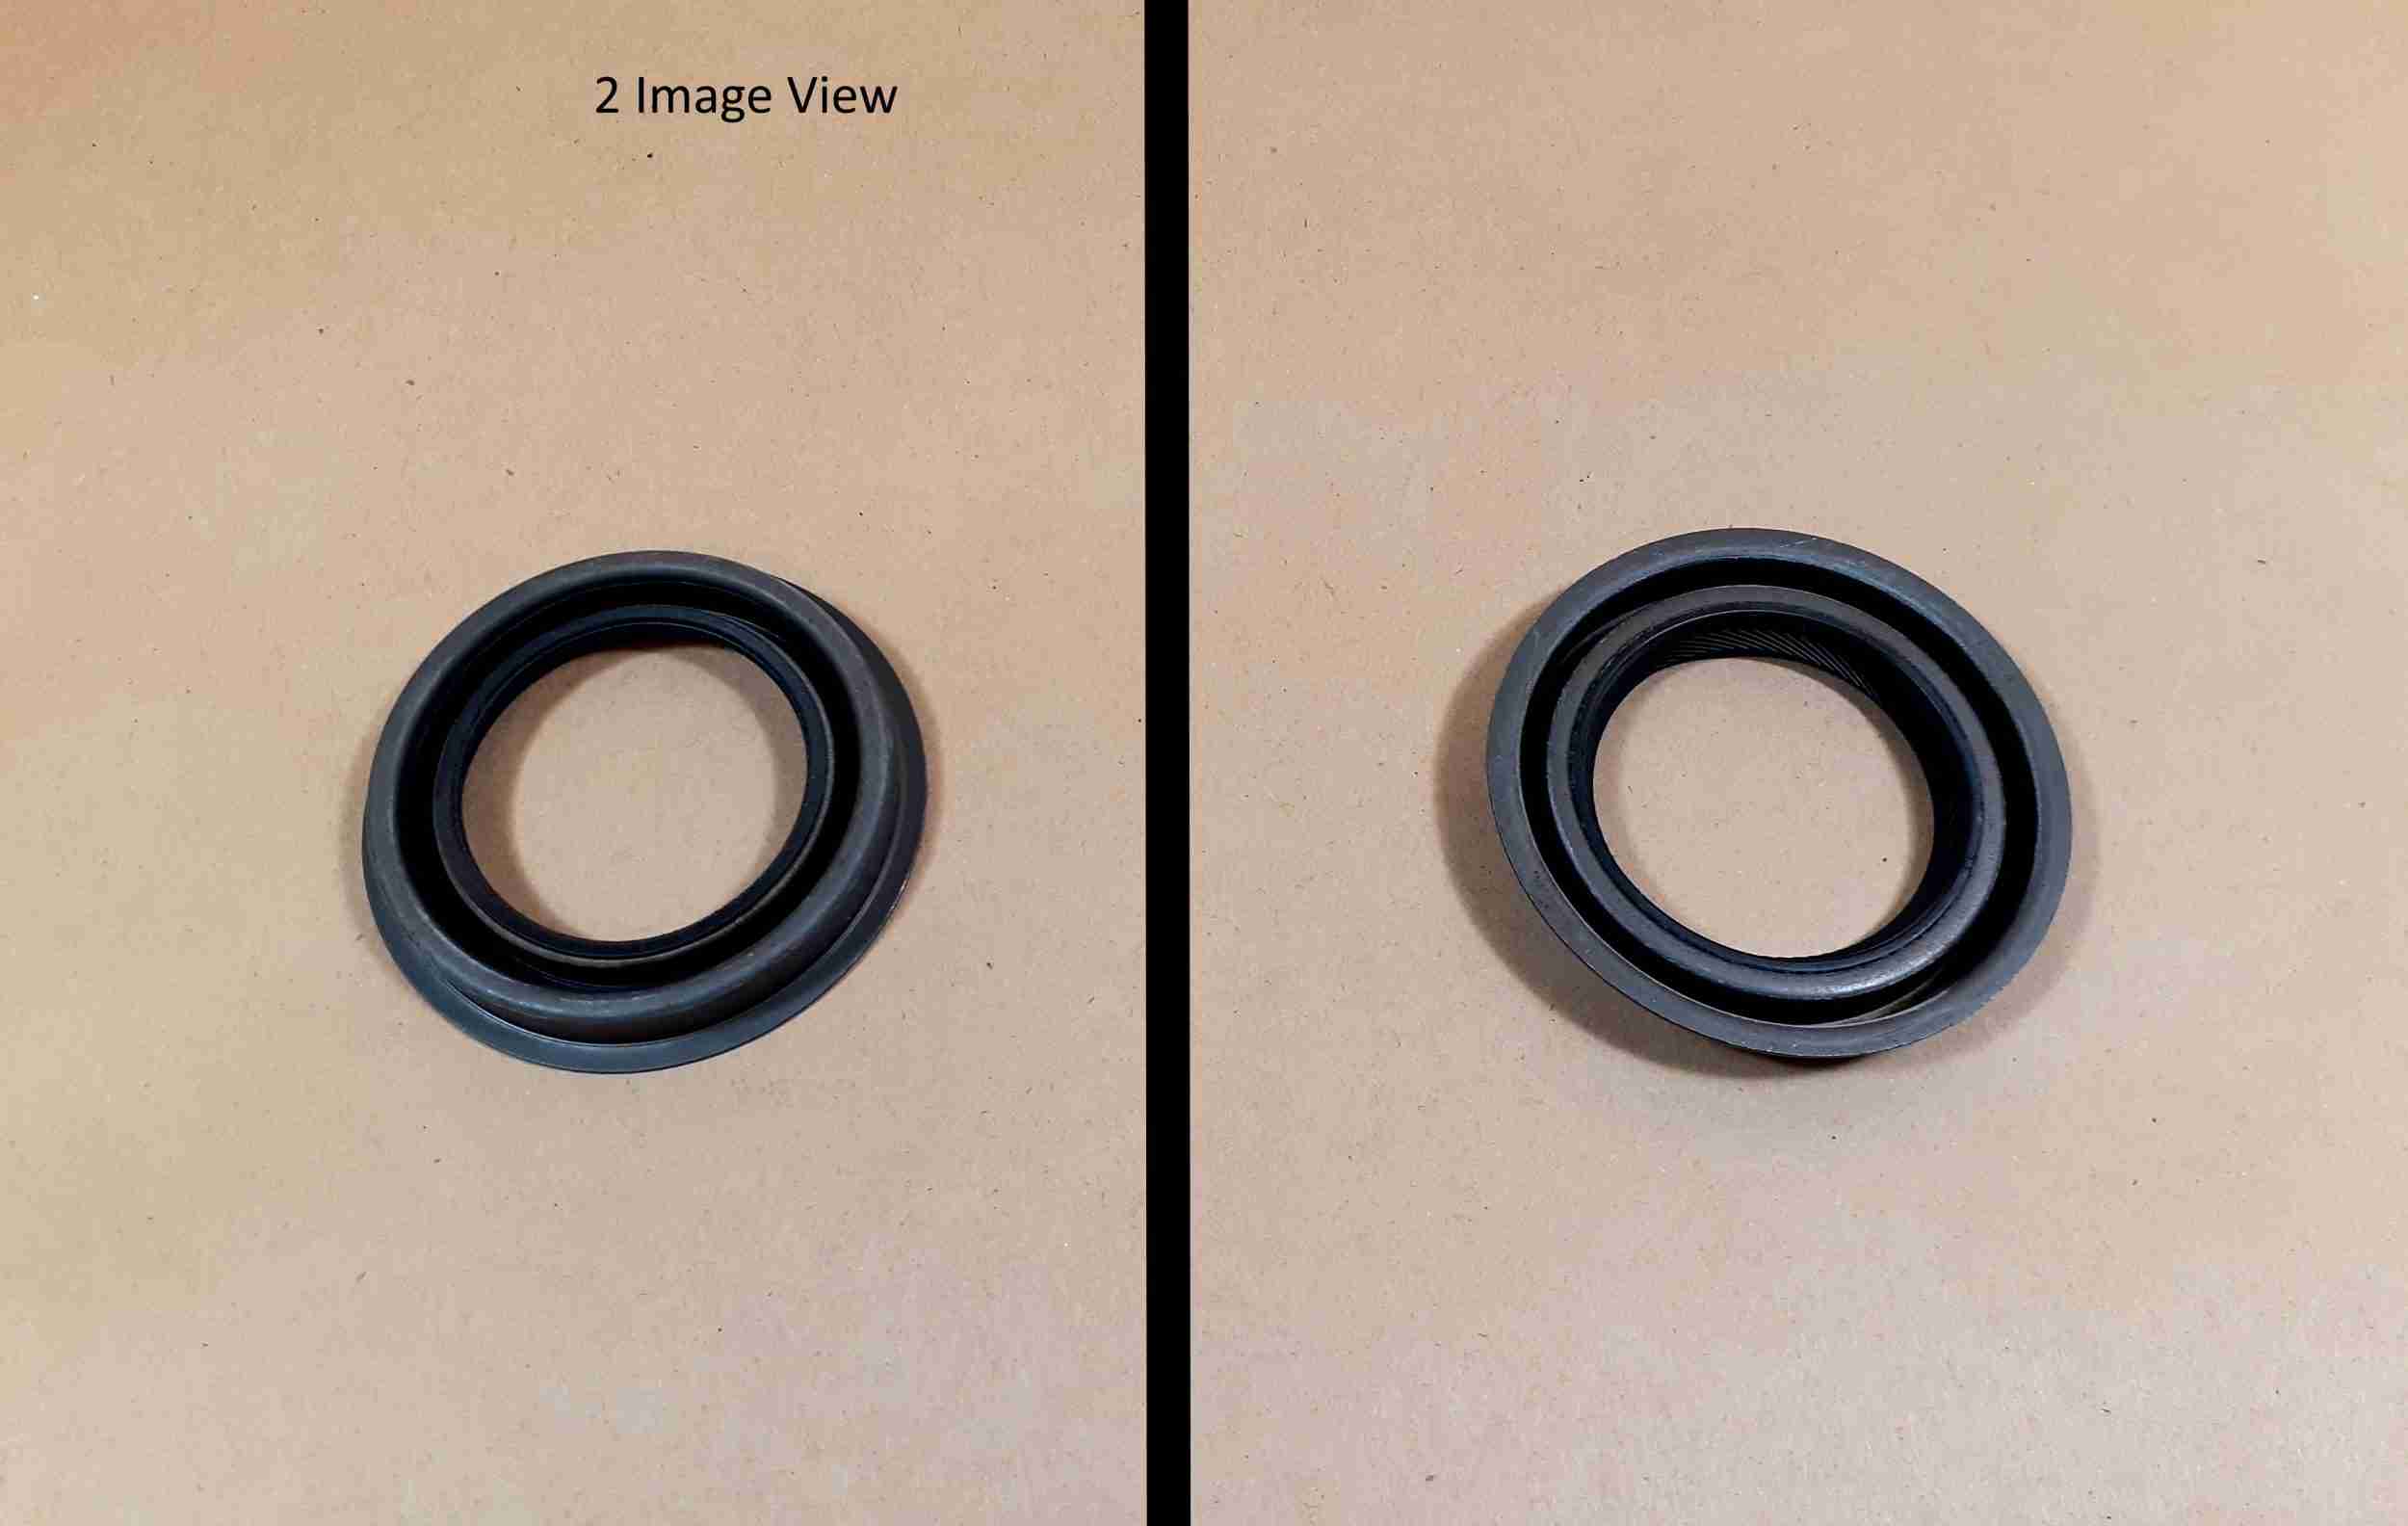 1953-81 Transmission Front Pump Oil Seal, 1953 Powerglide, 1964 Tempest Powerglide, 1964-69 Tempet Automatic, 1969-75 M38 HT, 1970-73 AT M35, 1976-81 M31/MV4, 1976-79 M33/M38/M40, 1981 T MD3, also 1384746